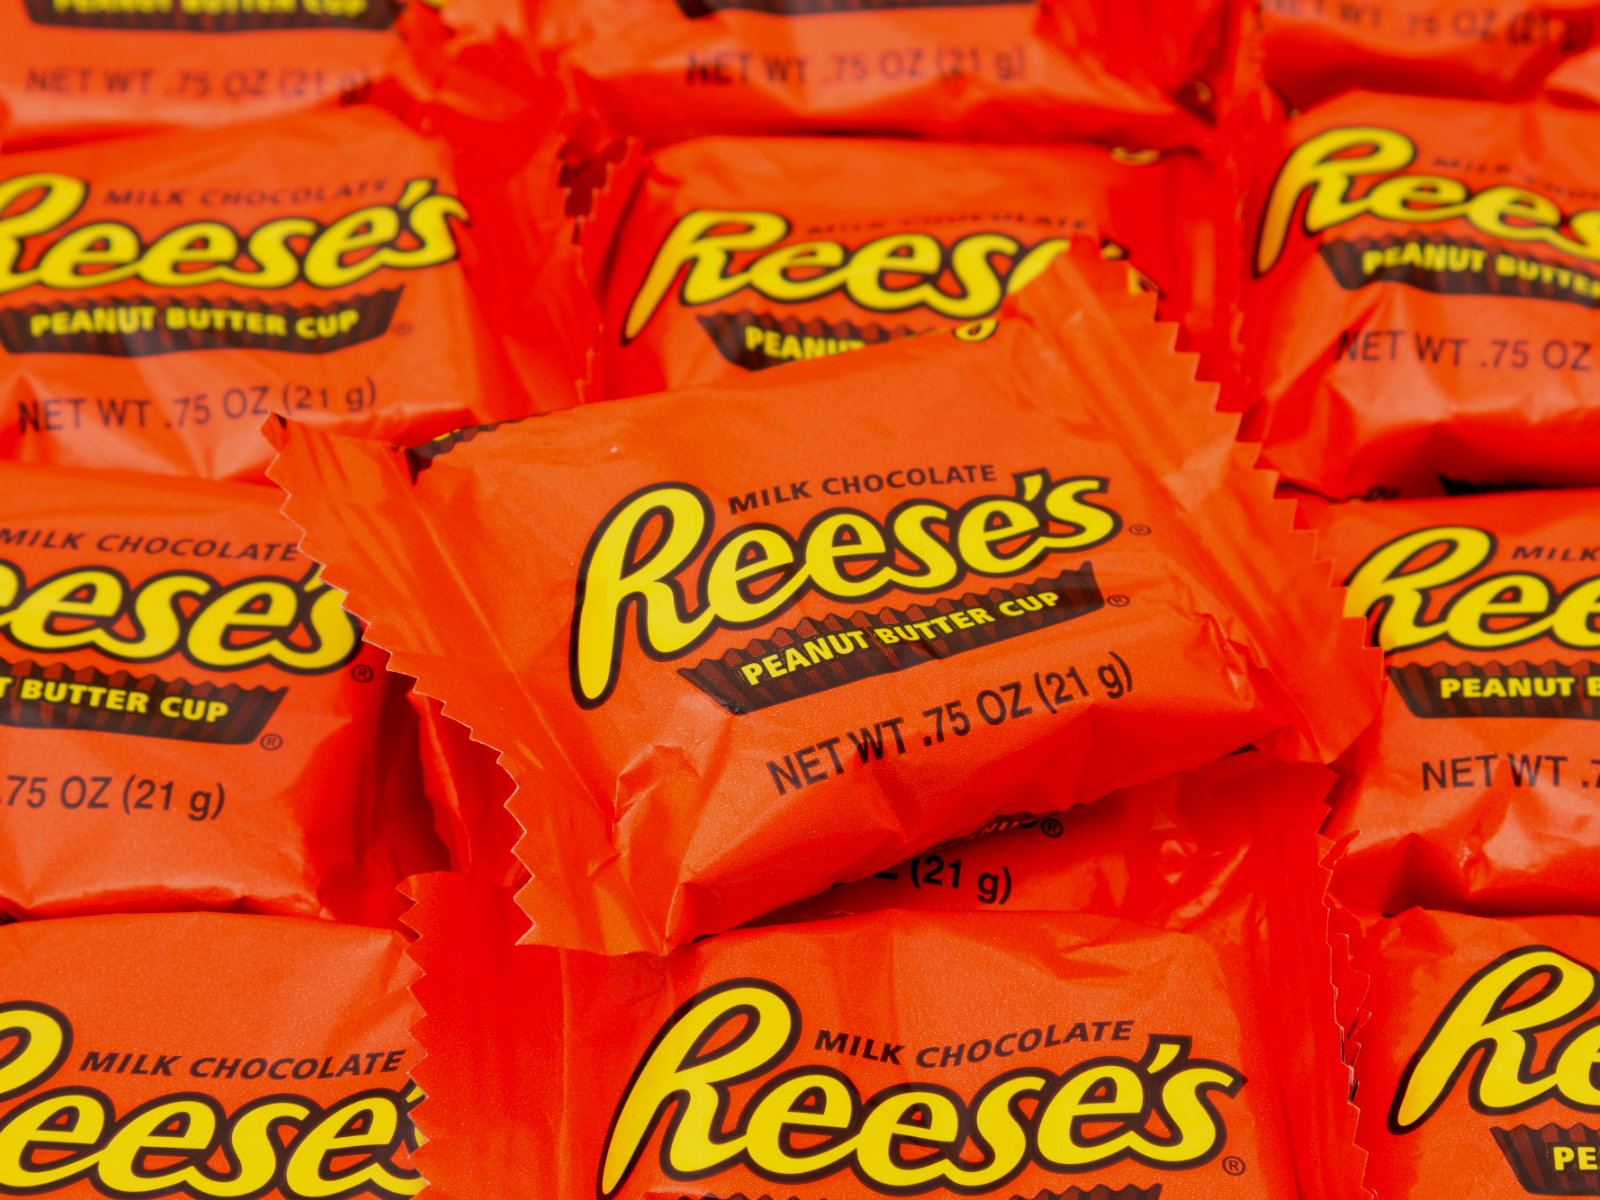 Hershey is trying to boost sales by selling Reese's Cups that are